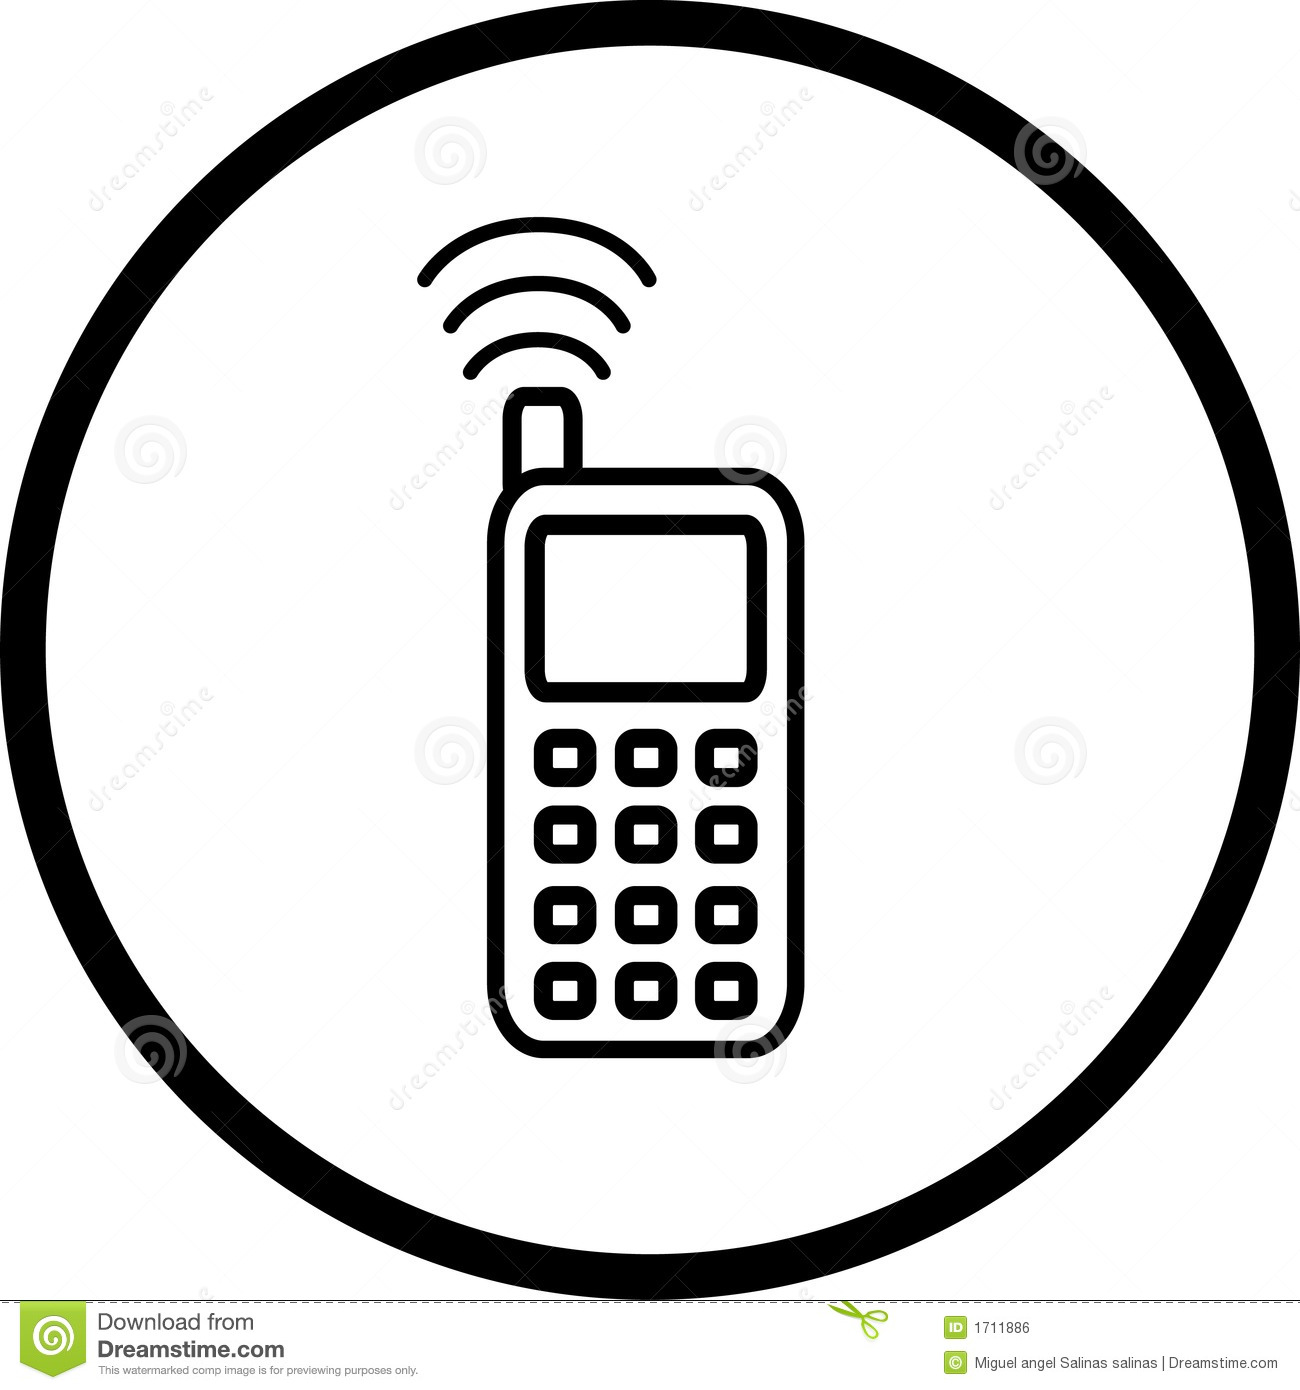 Cell Phone Vector Symbol Royalty Free Stock Image   Image  1711886